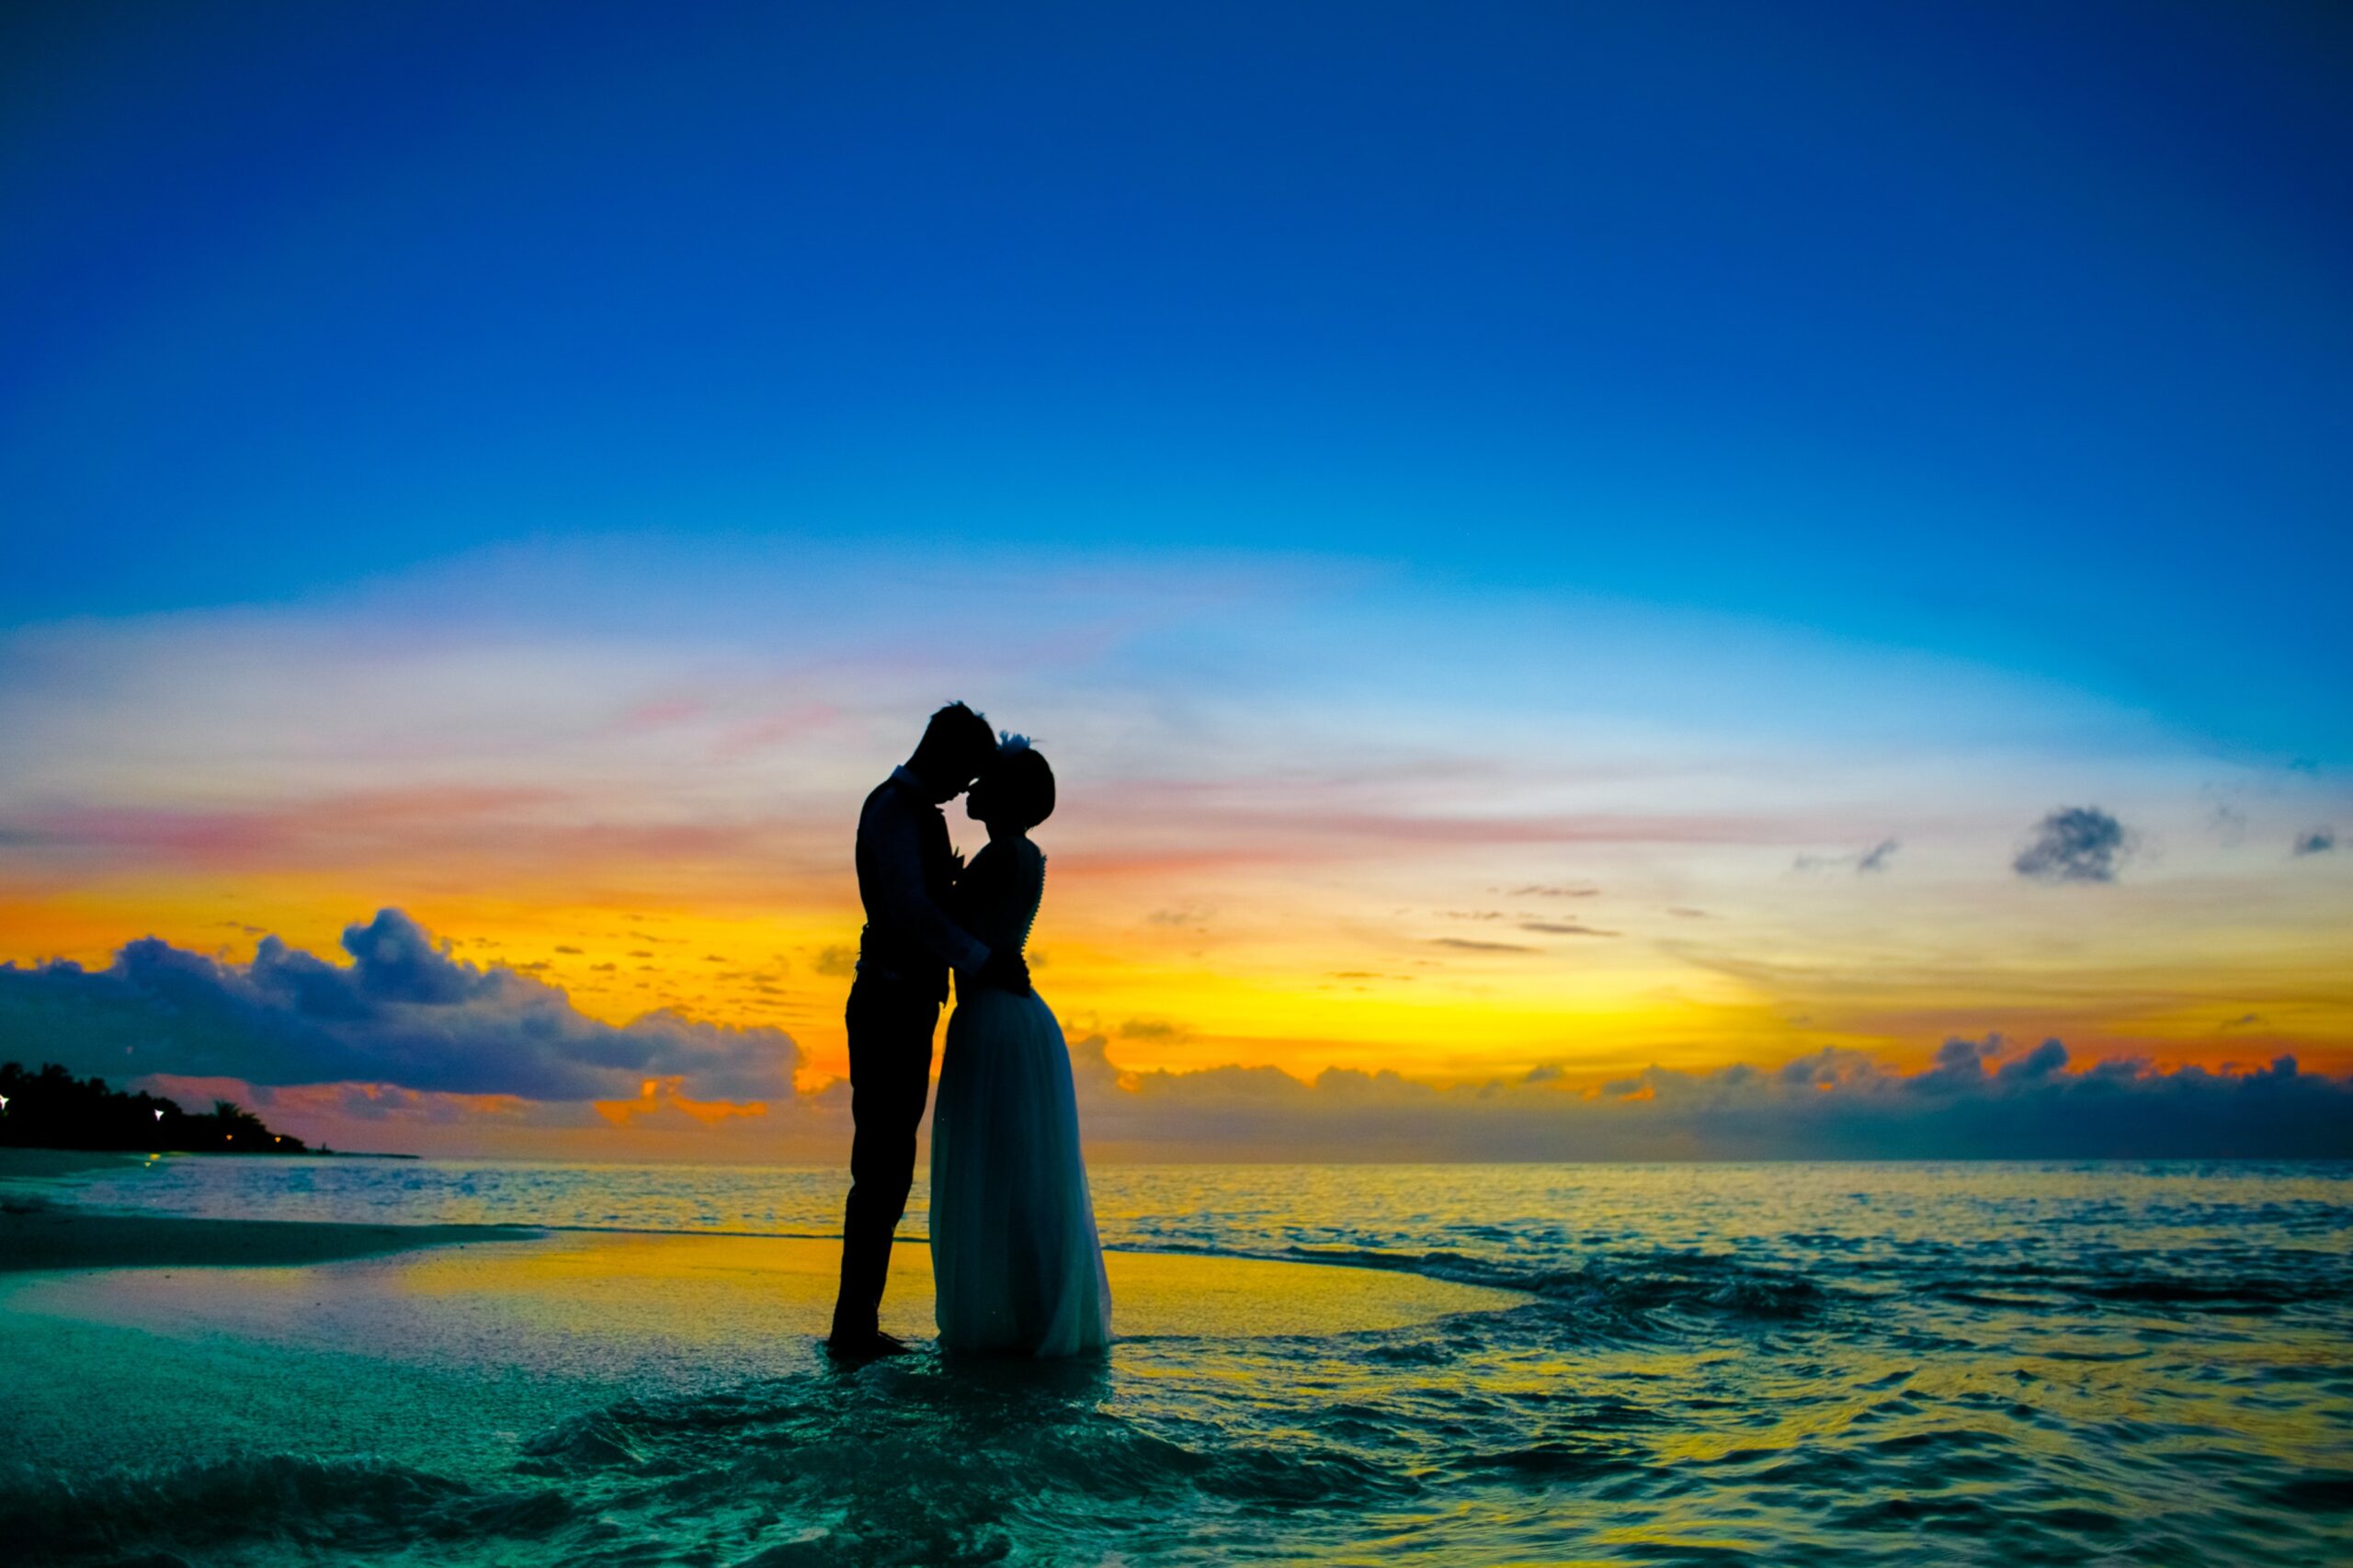 A honeymoon couple close together on a beach at sunset in the maldives